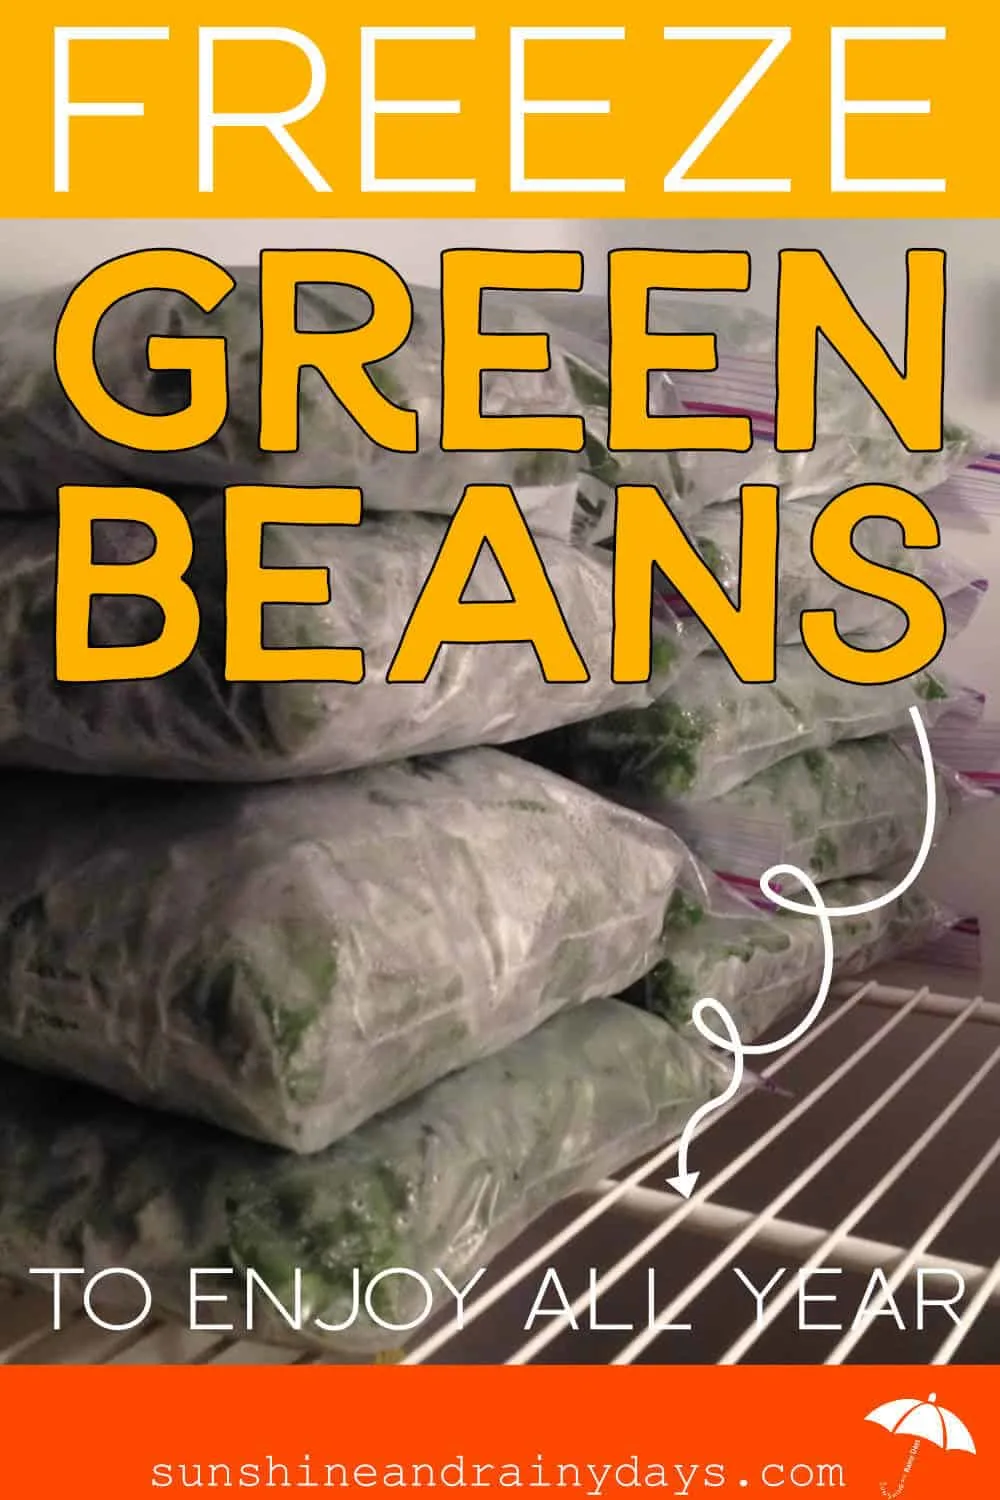 How To Freeze Green Beans To Enjoy All Year